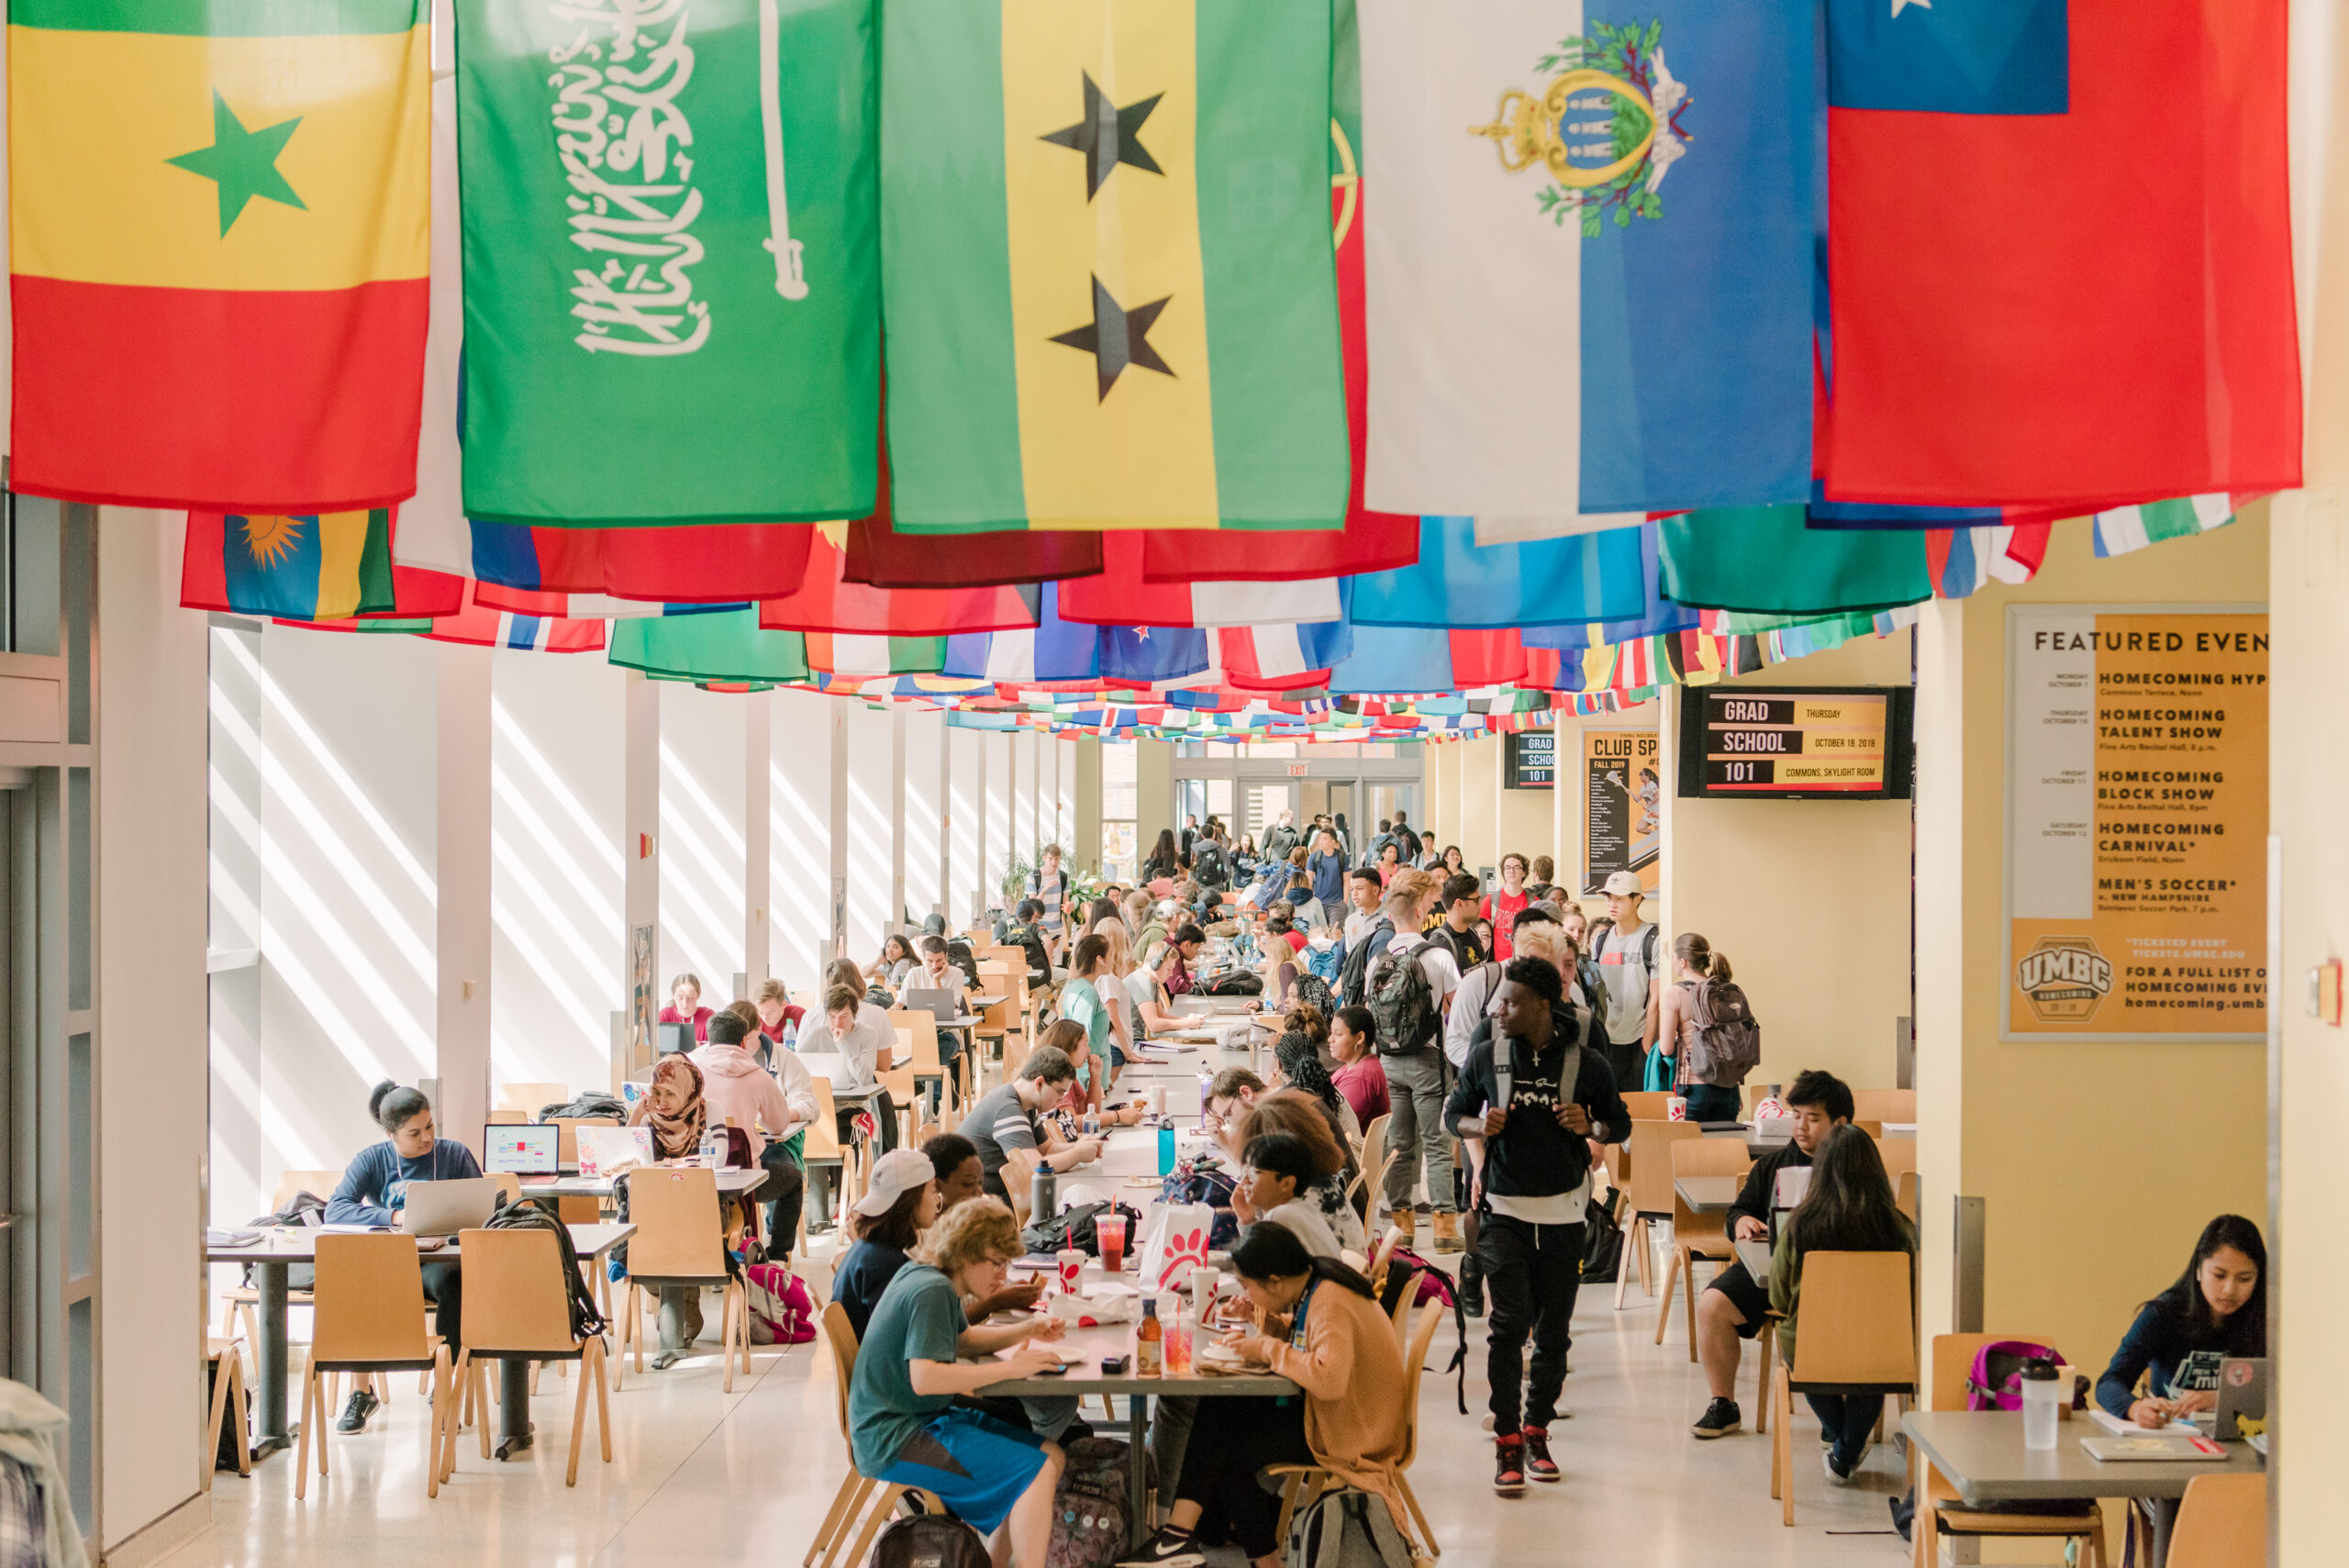 UMBC's commons is bustling with a diverse community of students. Some are on their way to class, some are eating, and some are working on assignments. Above them hangs a large collection of all the country flags. Posters on the walls display upcoming featured events, club sports, and information about grad school.